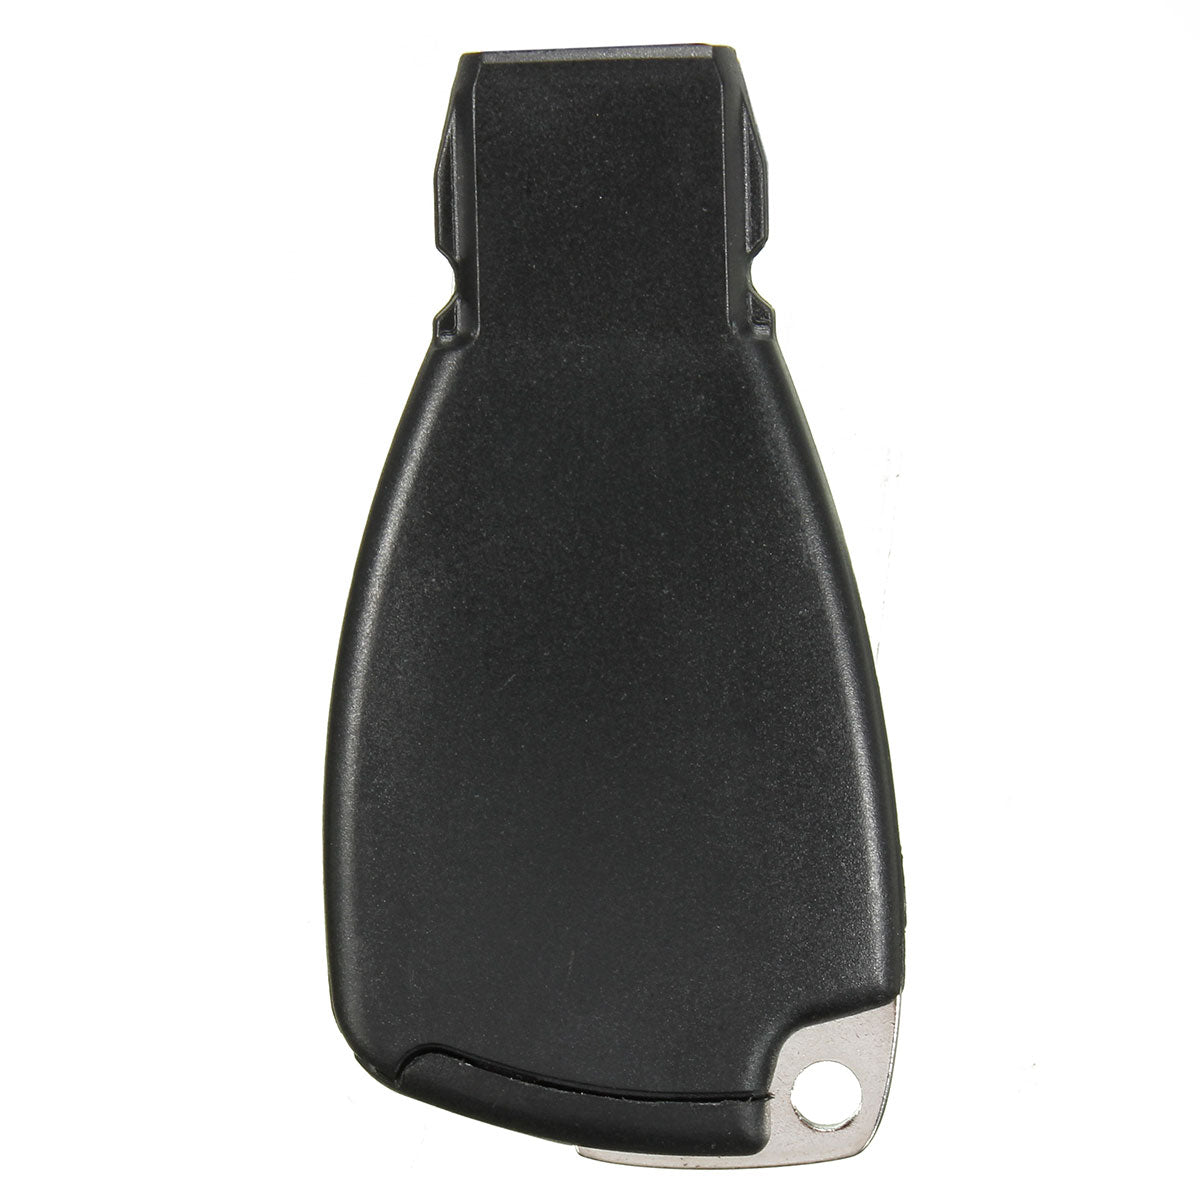 3-key Remote Key Case With Small Key And Battery Clip For Mercedes - Auto GoShop